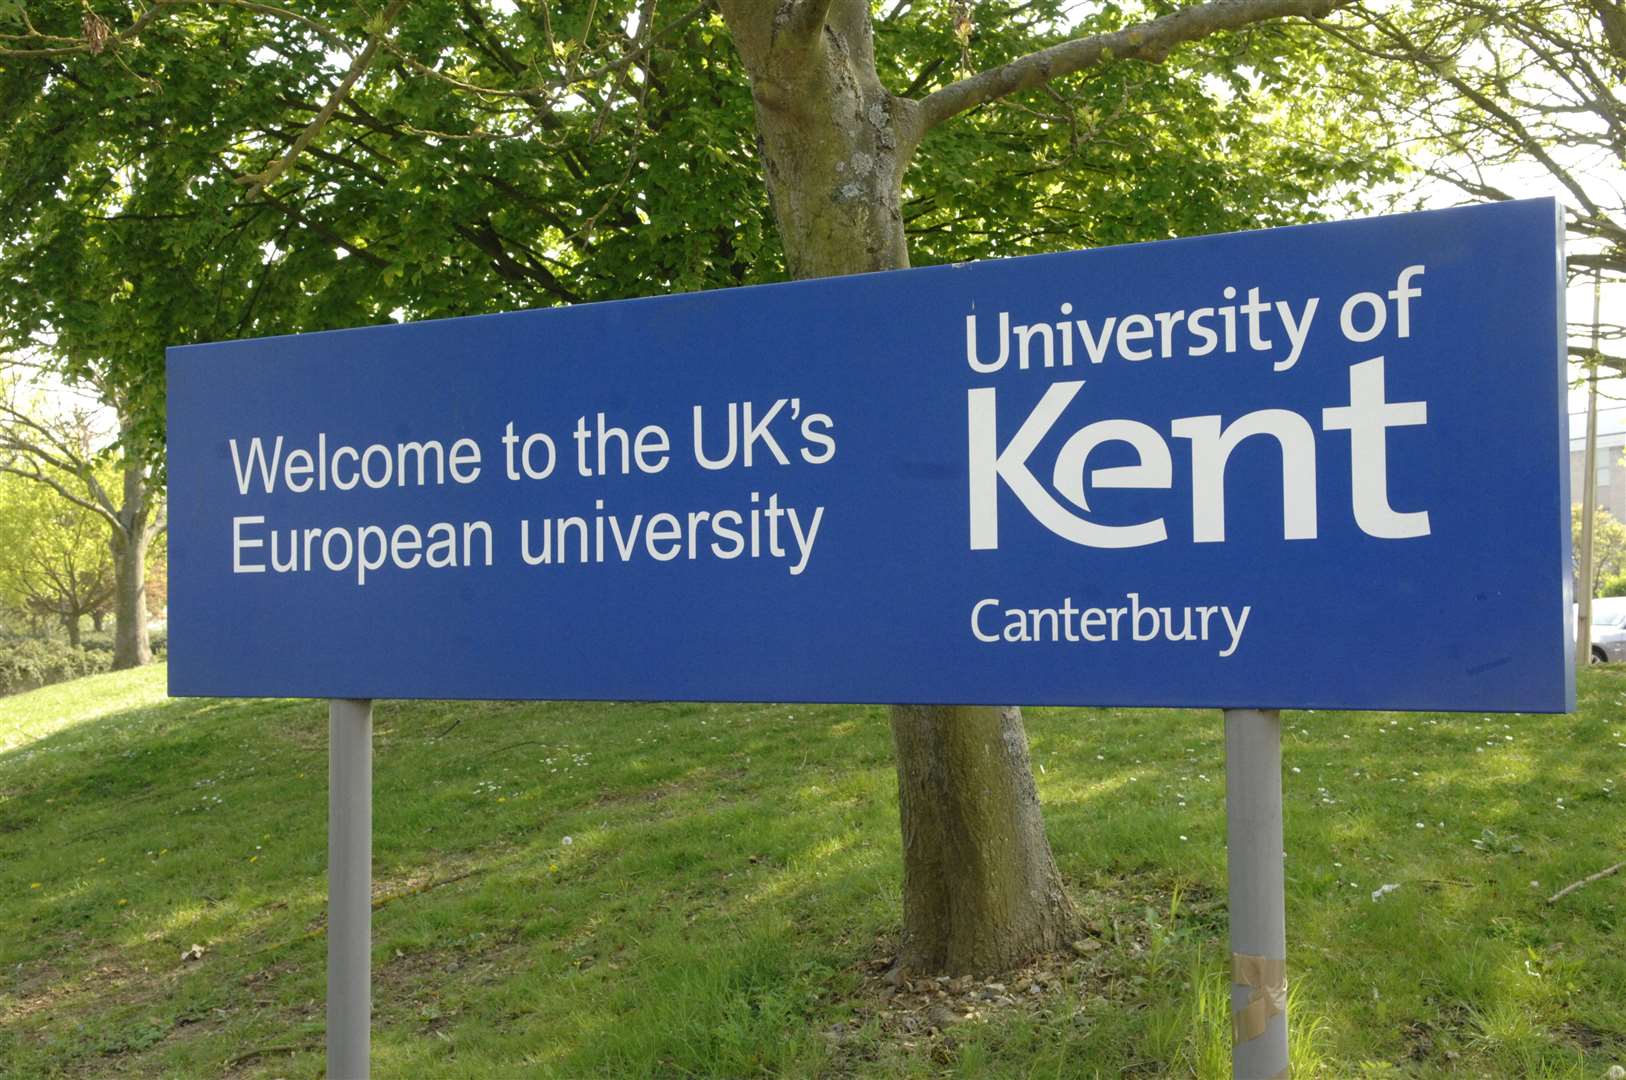 Research was conducted by the University of Kent's School of Psychology